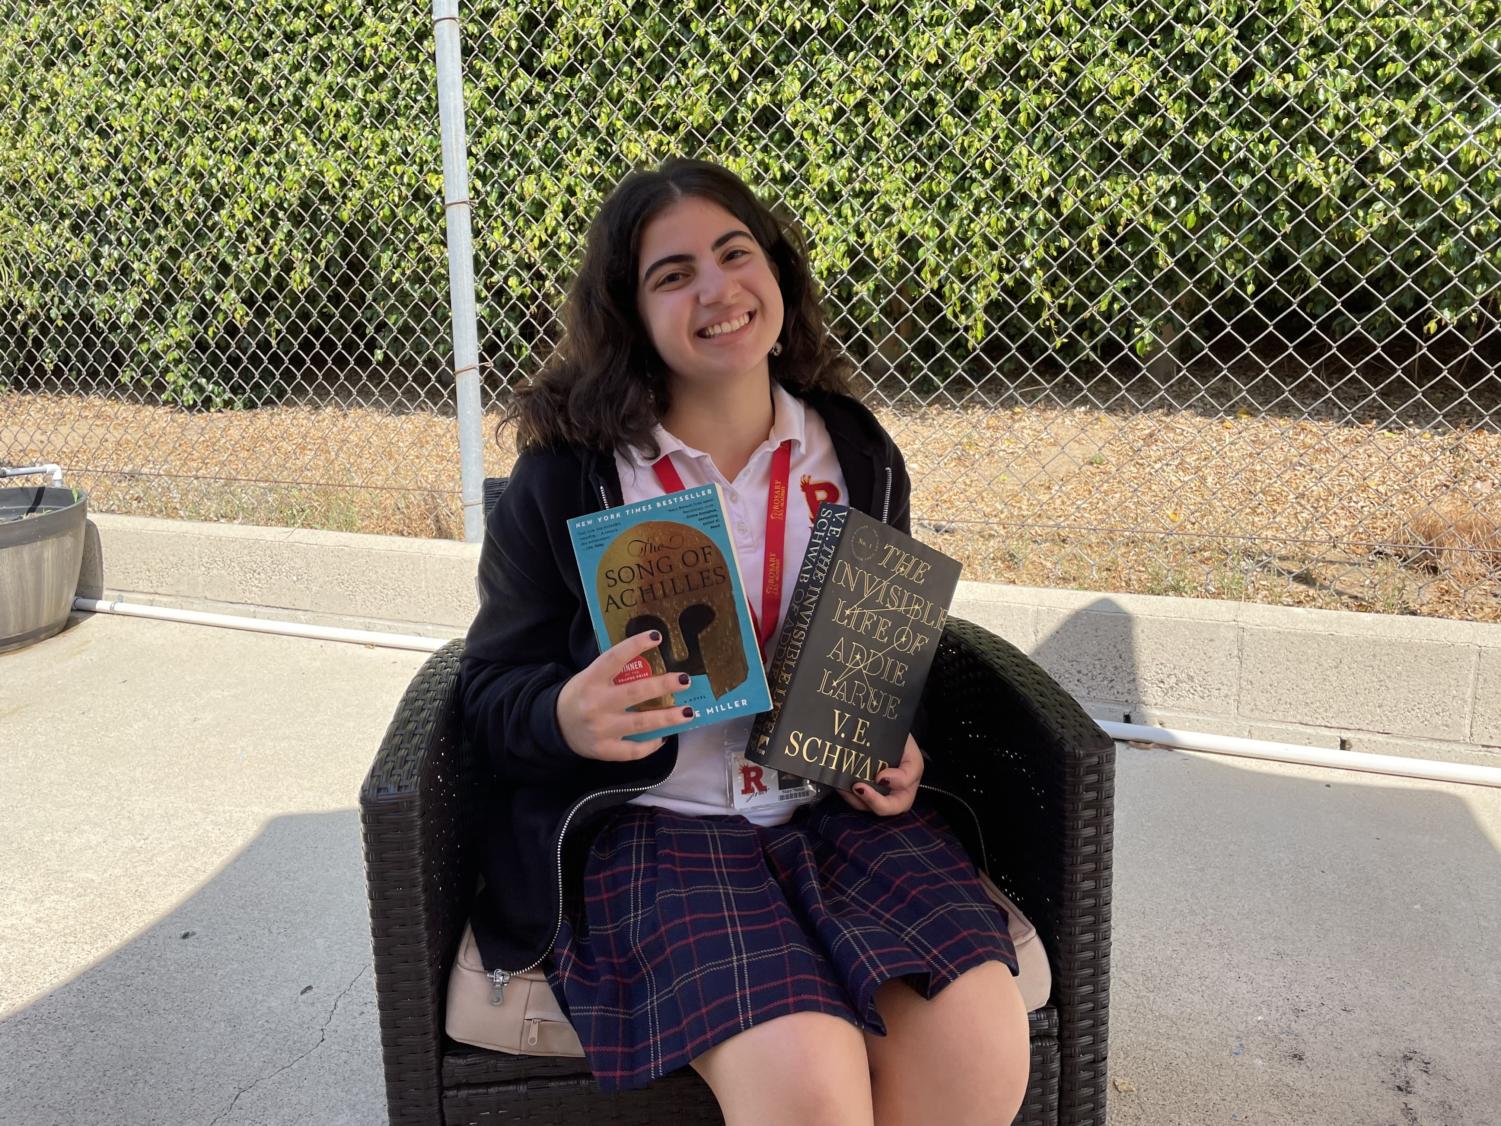 Madeline Miller poses with her book The Song of Achilles during